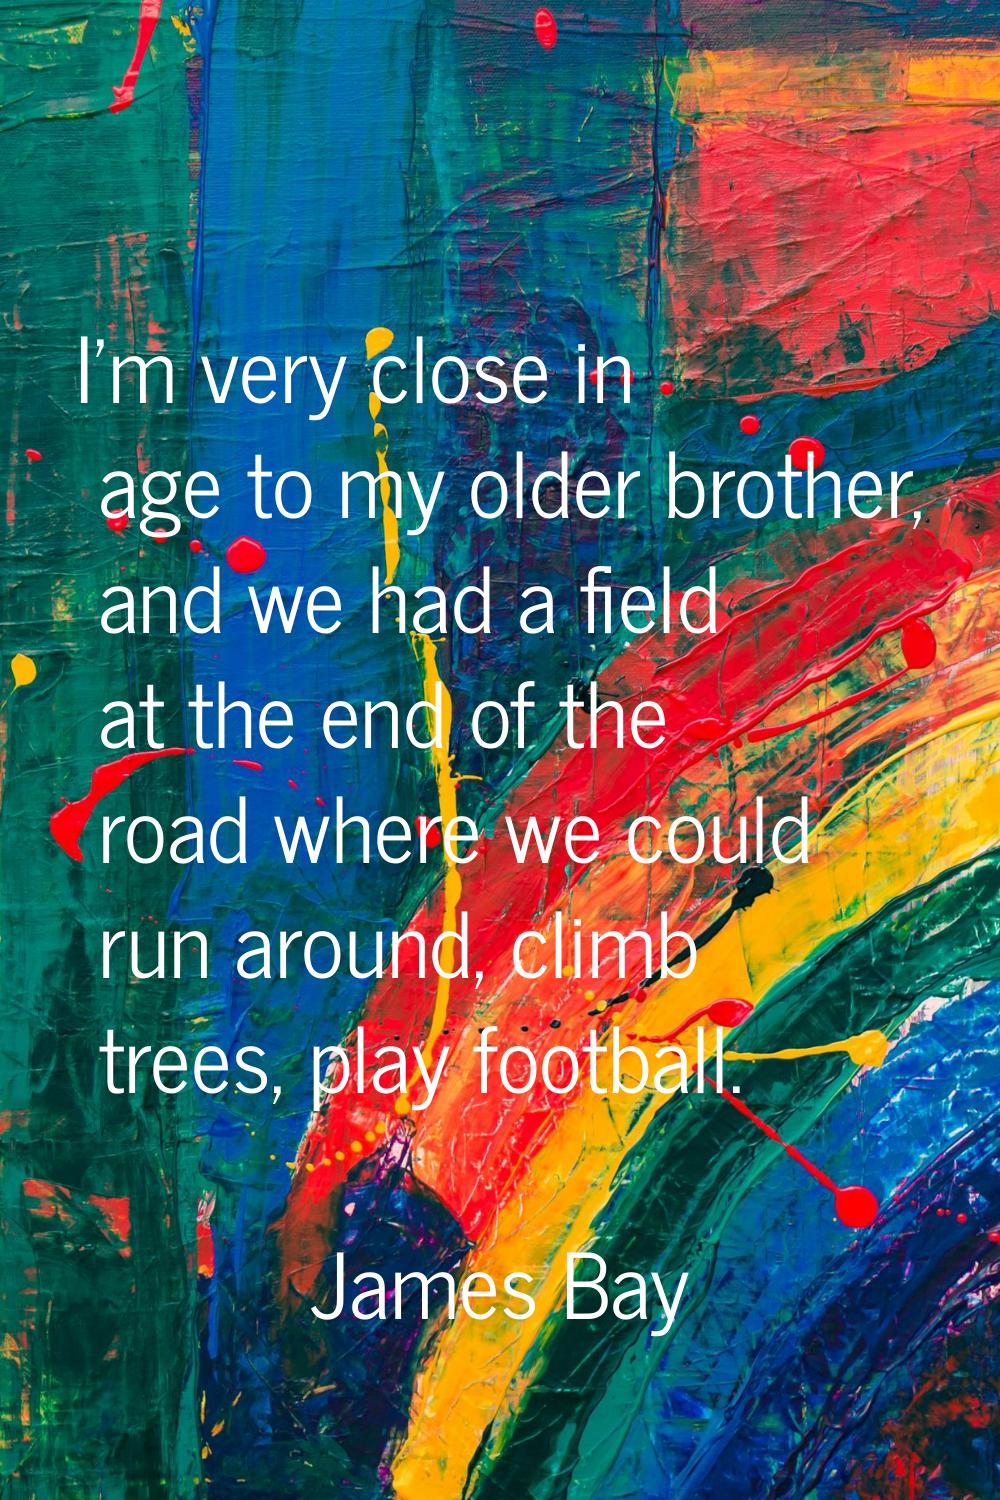 I'm very close in age to my older brother, and we had a field at the end of the road where we could